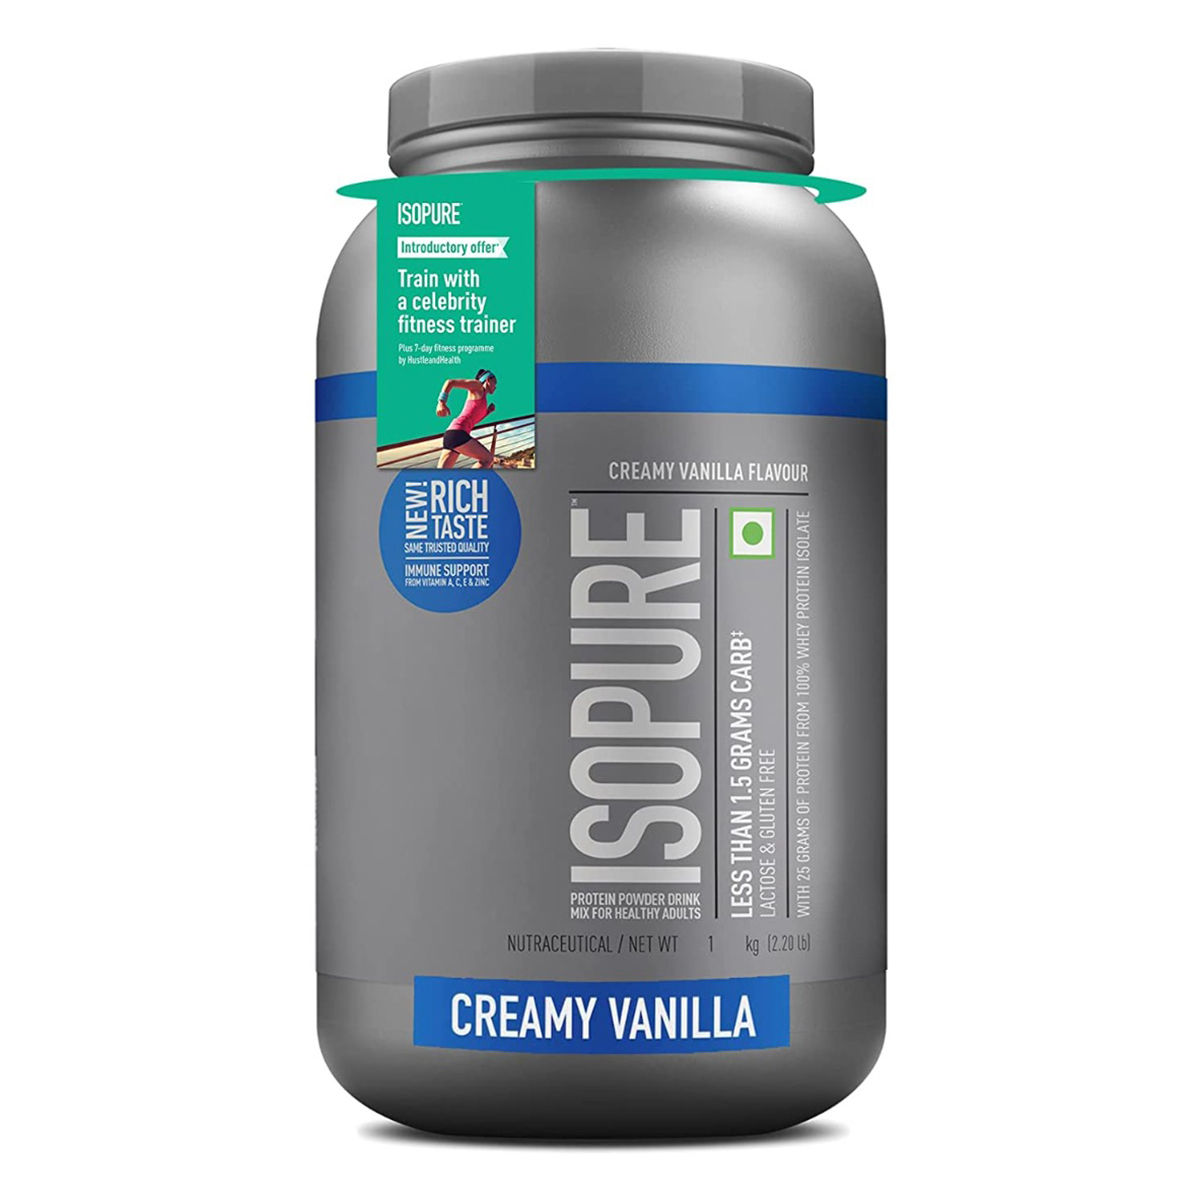 Buy Isopure Less Than 1.5 gm Carbs 100% Whey Protein Isolate Creamy Vanilla Flavour Powder, 2.20 lb Online